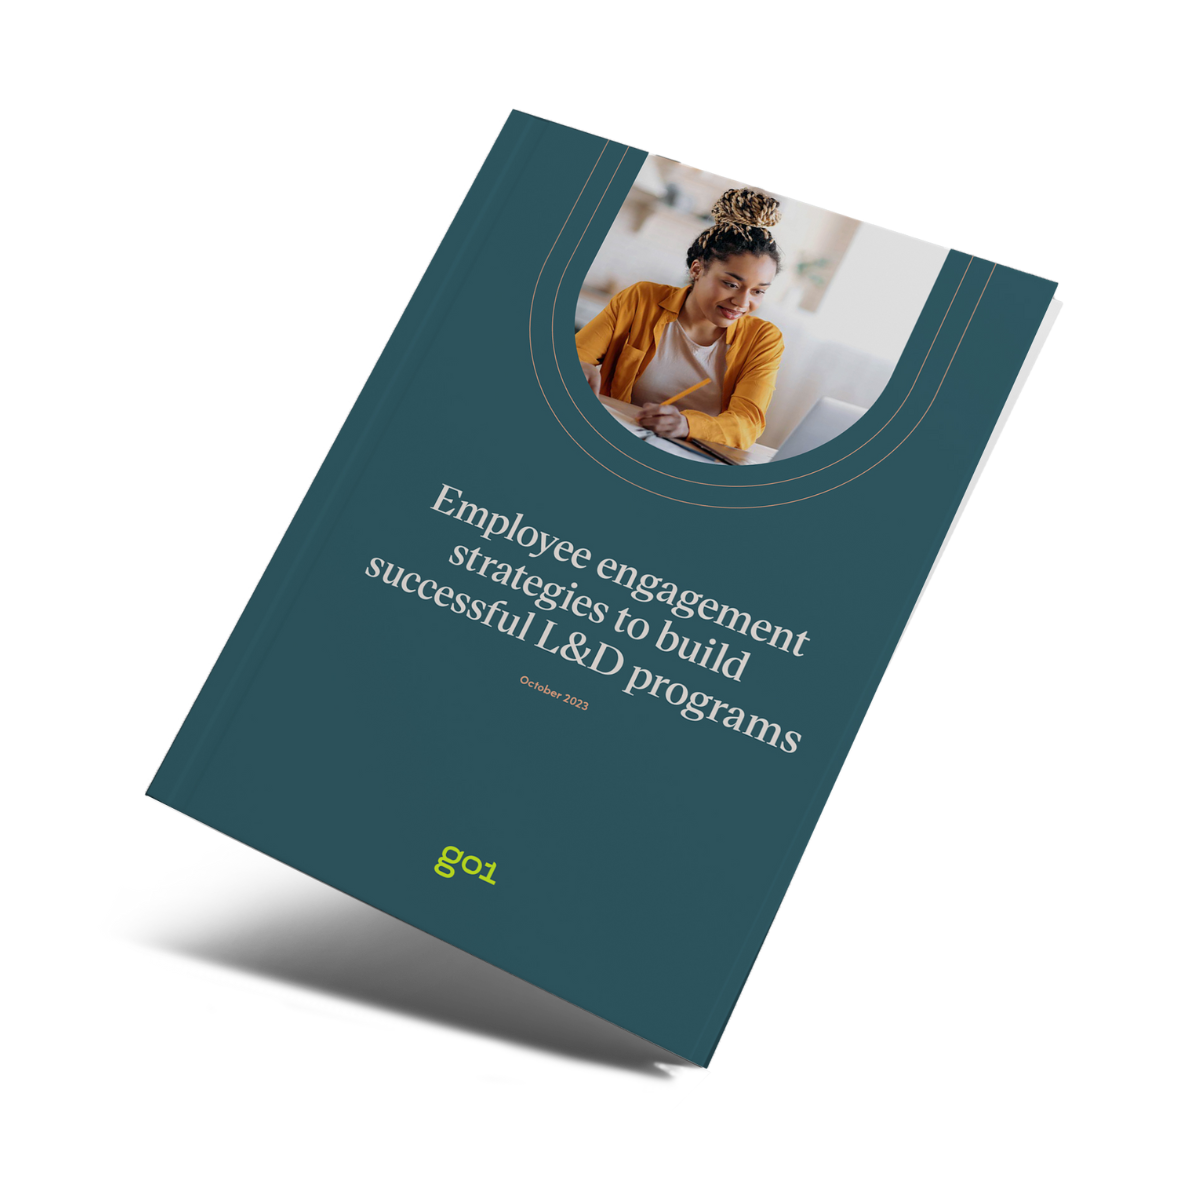 Employee engagement strategies to build successful L&D programs